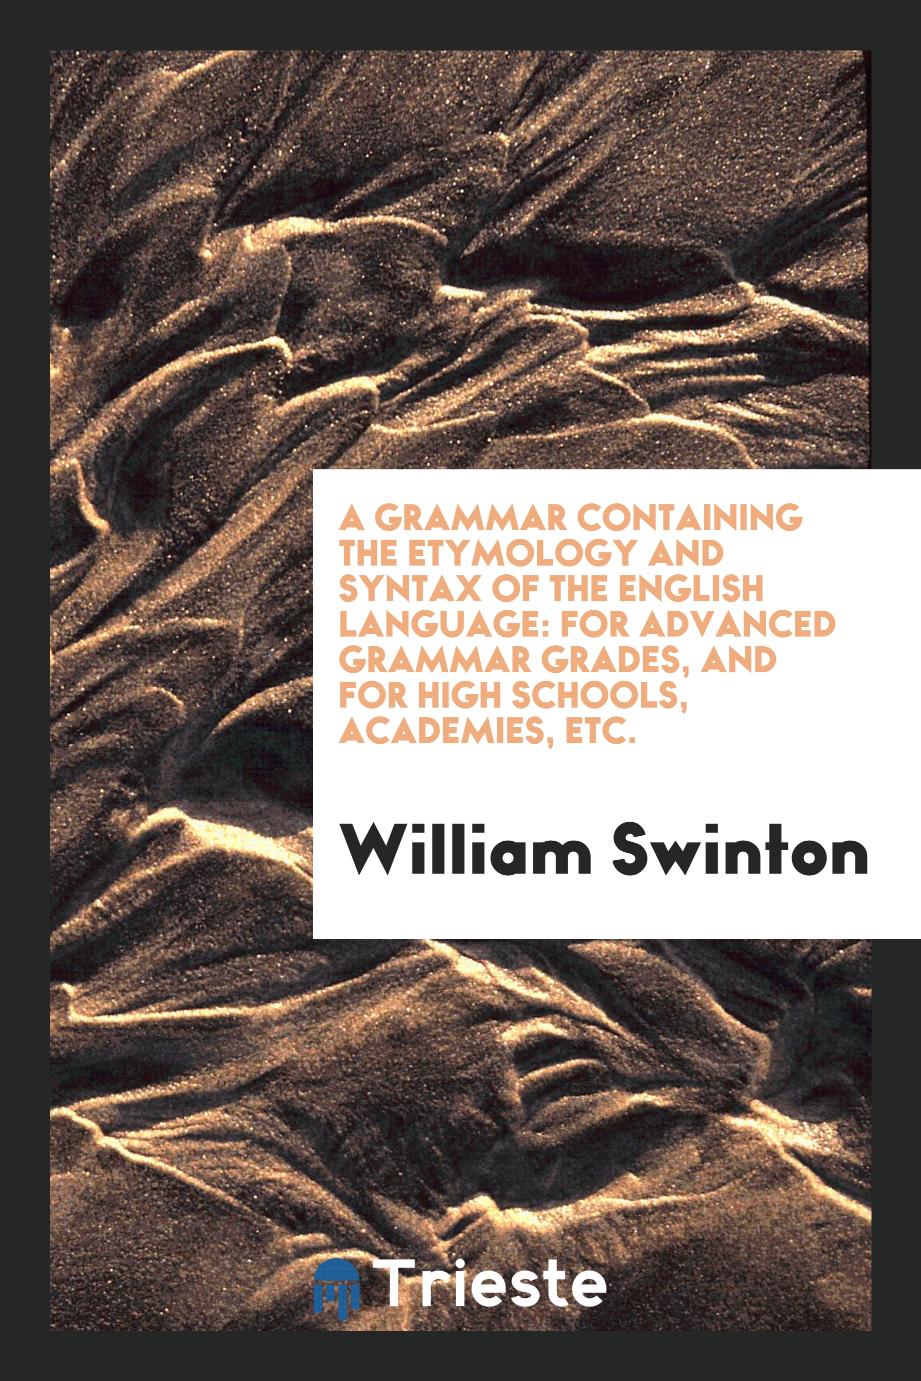 A grammar containing the etymology and syntax of the English language: for advanced grammar grades, and for high schools, academies, etc.